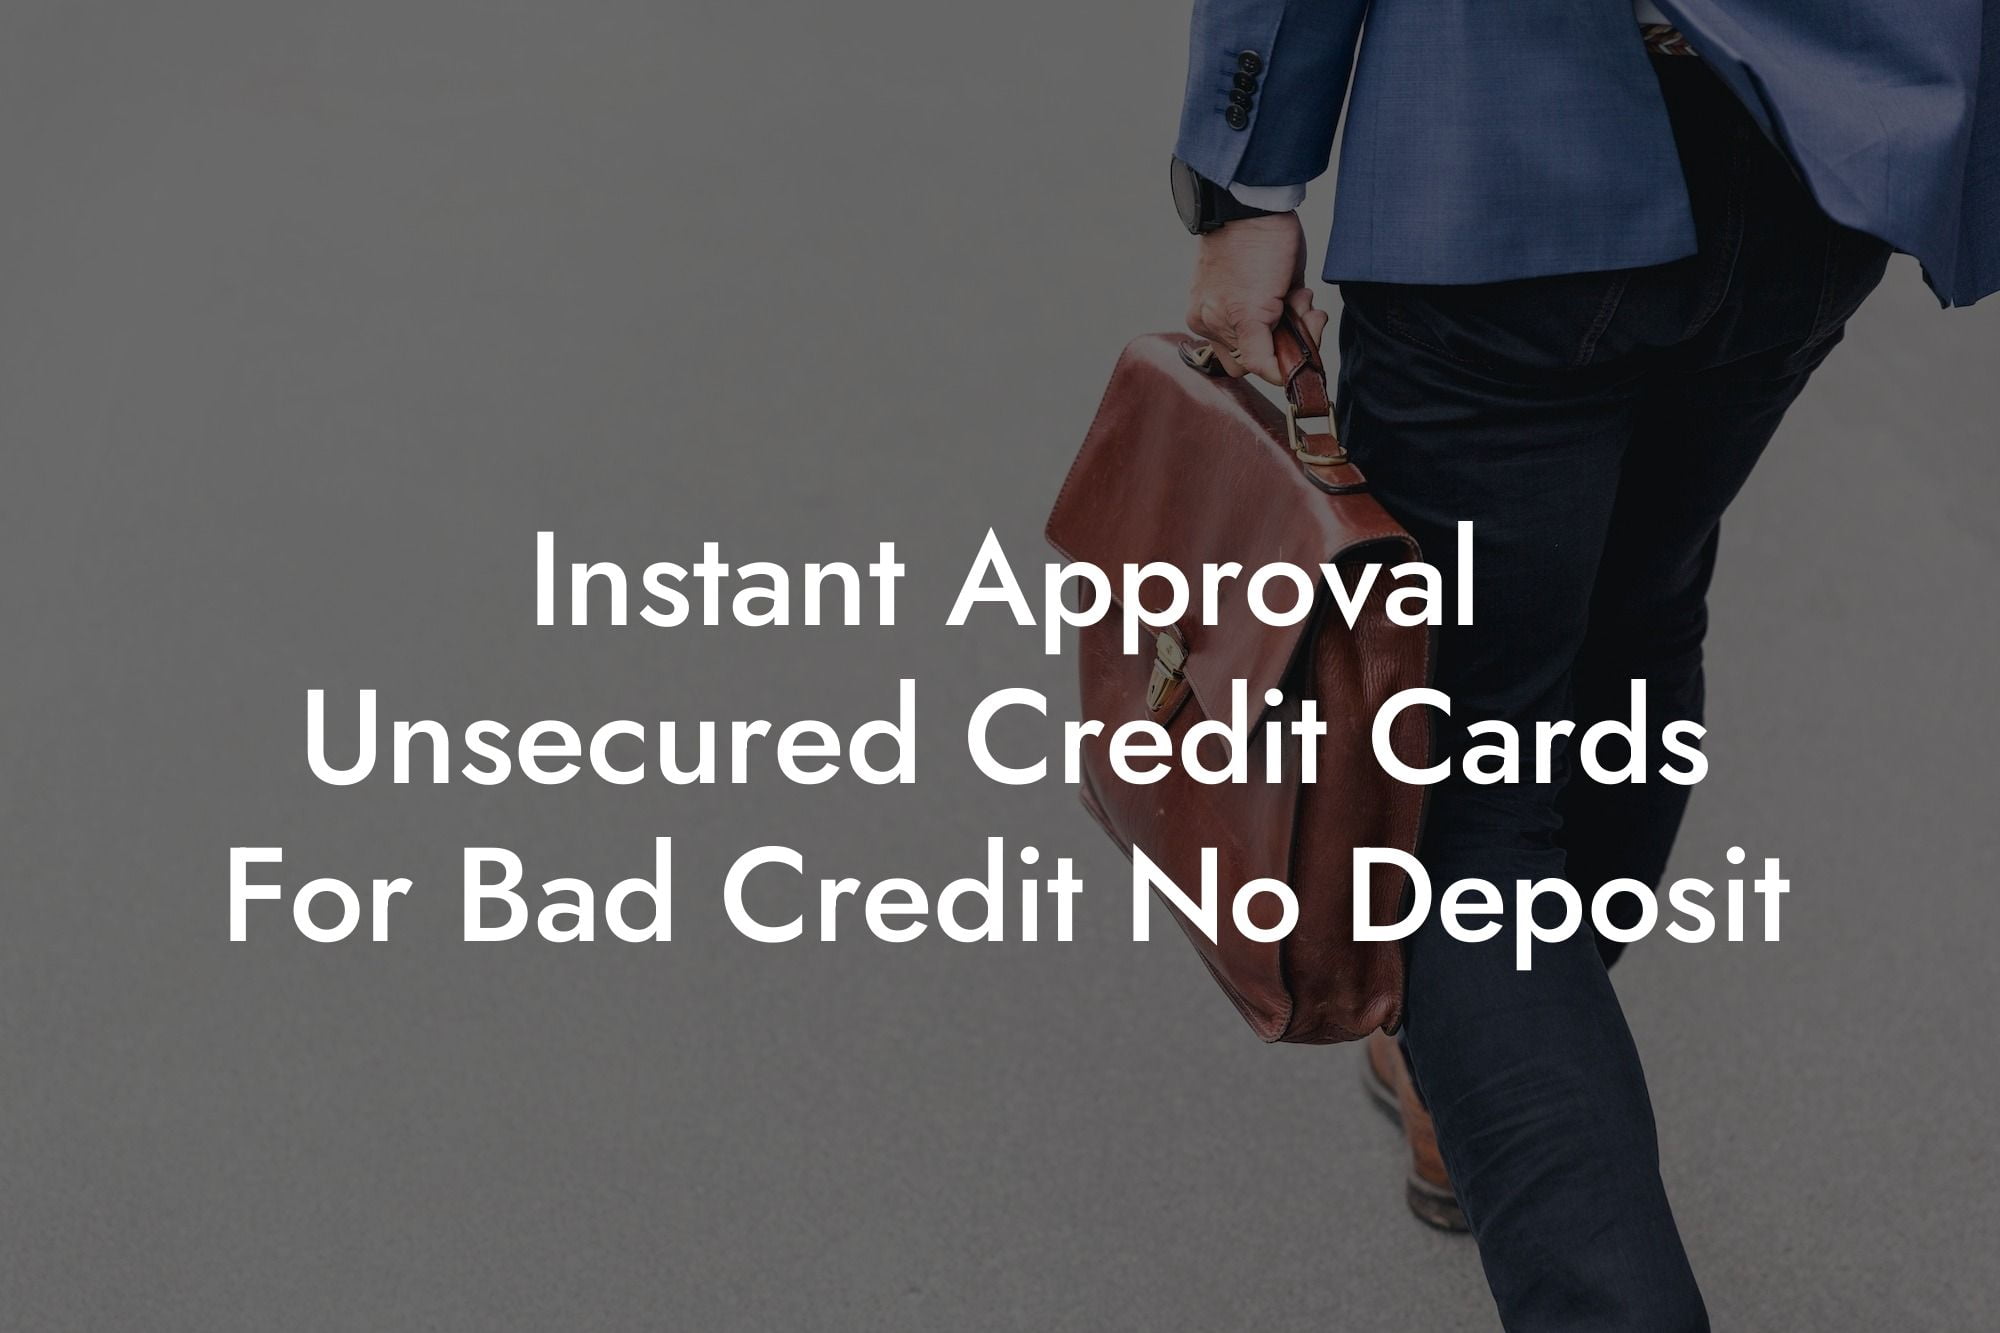 Instant Approval Unsecured Credit Cards For Bad Credit No Deposit